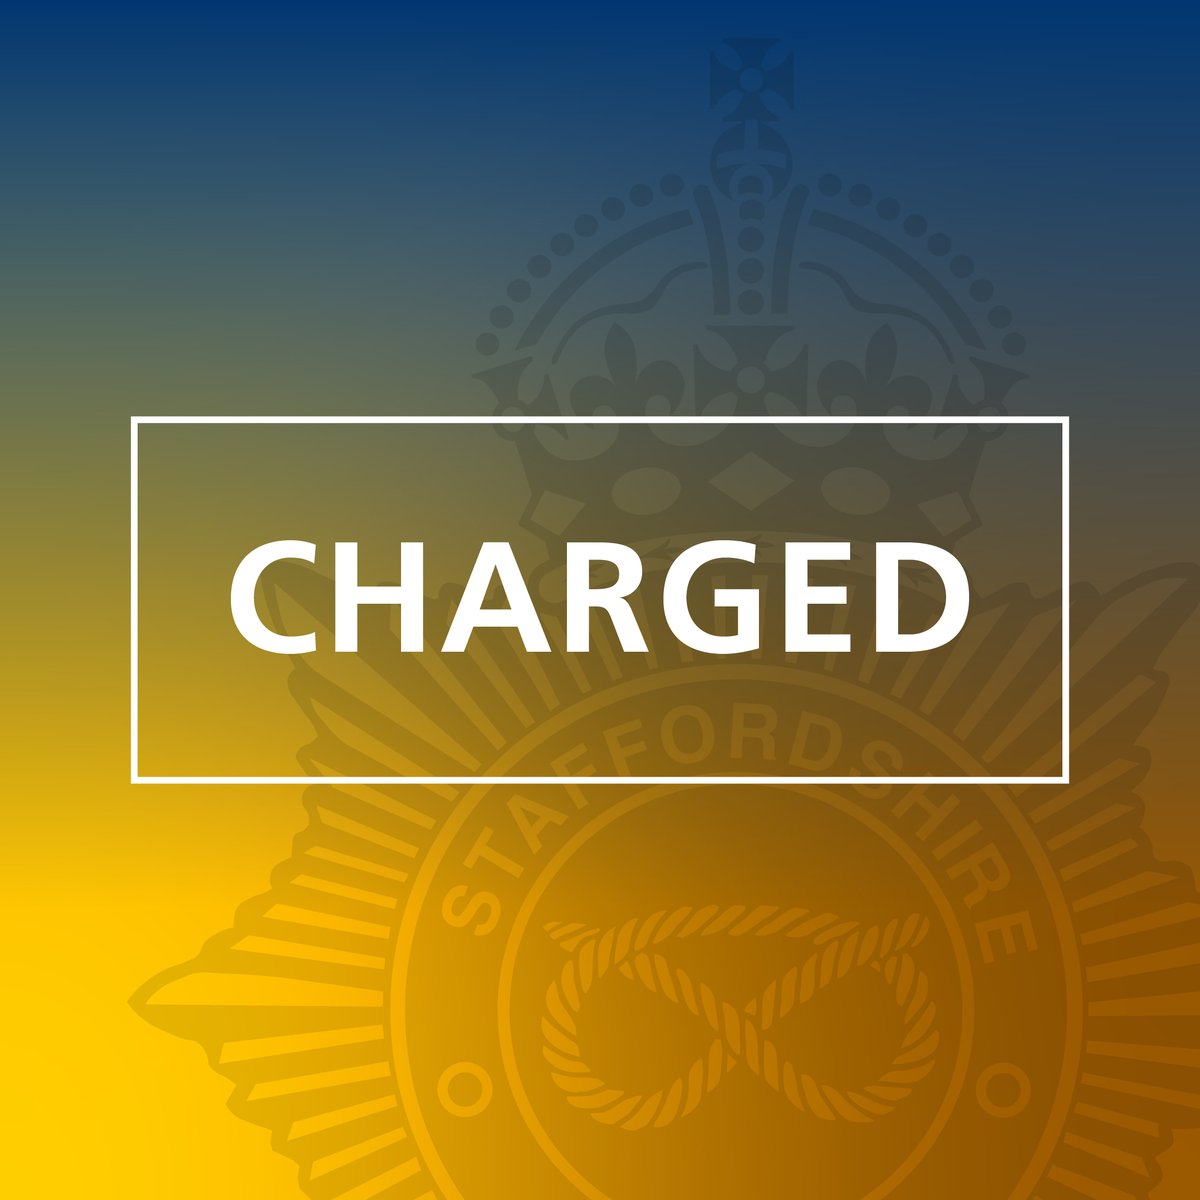 Three men have been charged with drug supply offences after officers discovered around £10-million worth of cocaine. Read more here: orlo.uk/9ZXFq